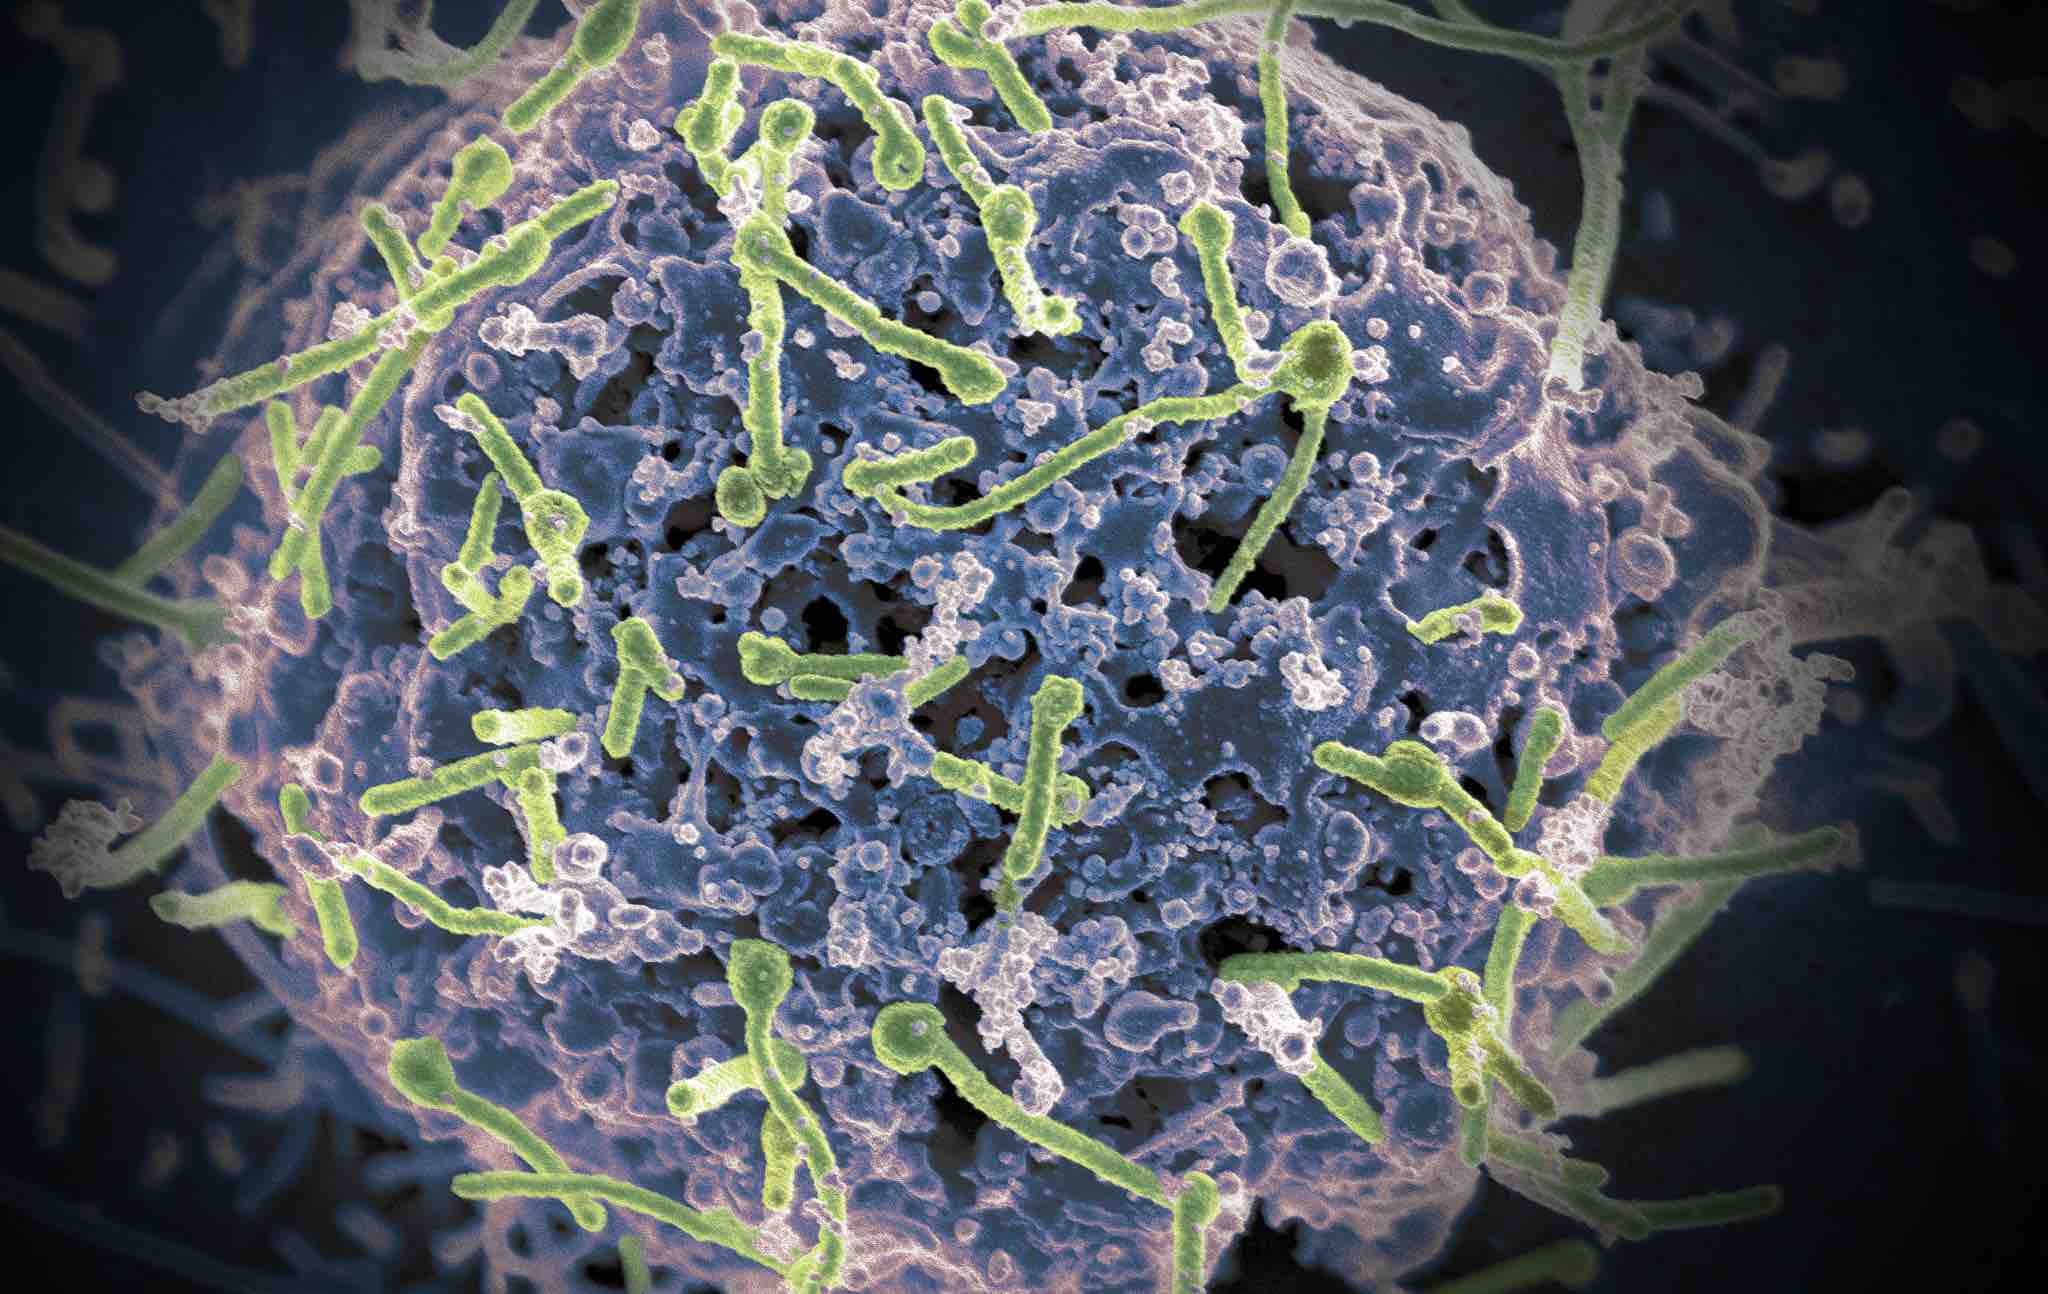 Ebola virus (in green) is shown on cell surface (Photo: NIH Image Gallery/Flickr)